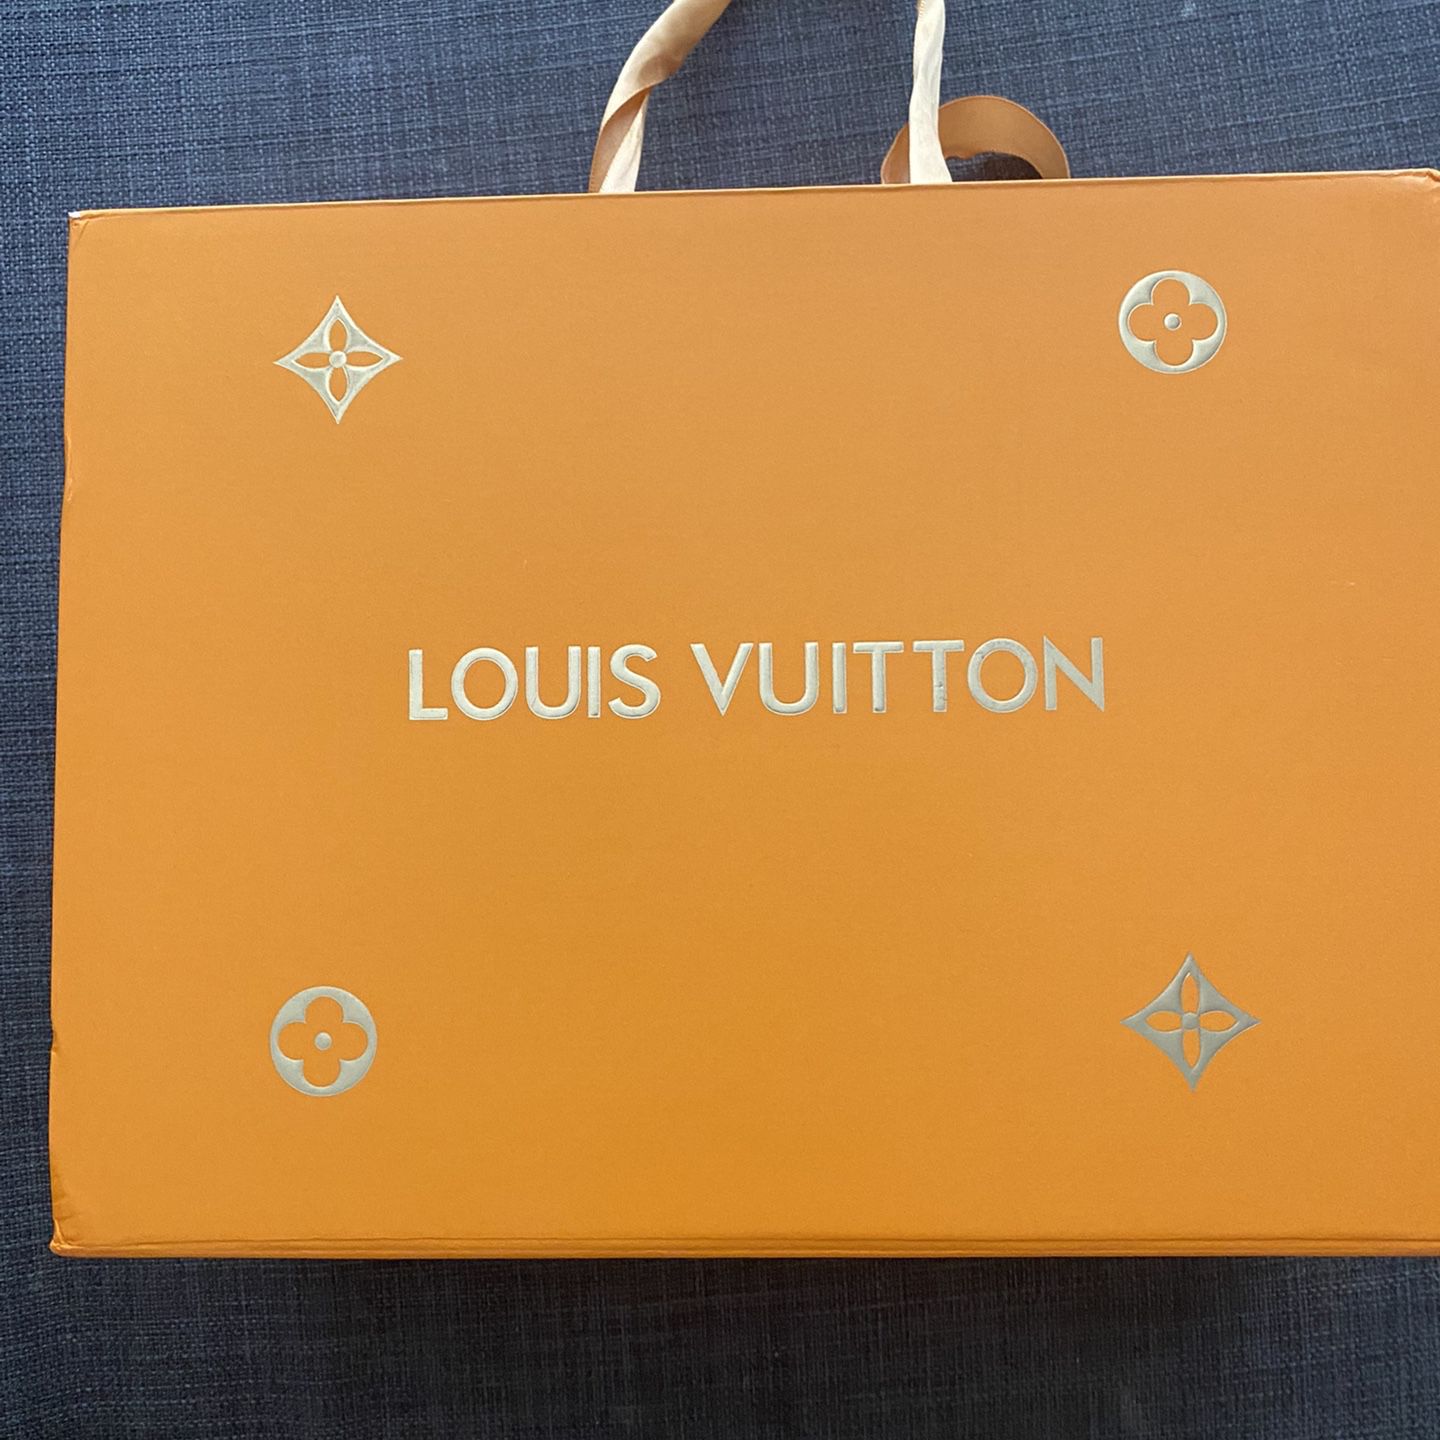 Authentic Louis Vuitton Gift Box, Dustbag Cover, and Shopping Bag for Sale  in West Covina, CA - OfferUp